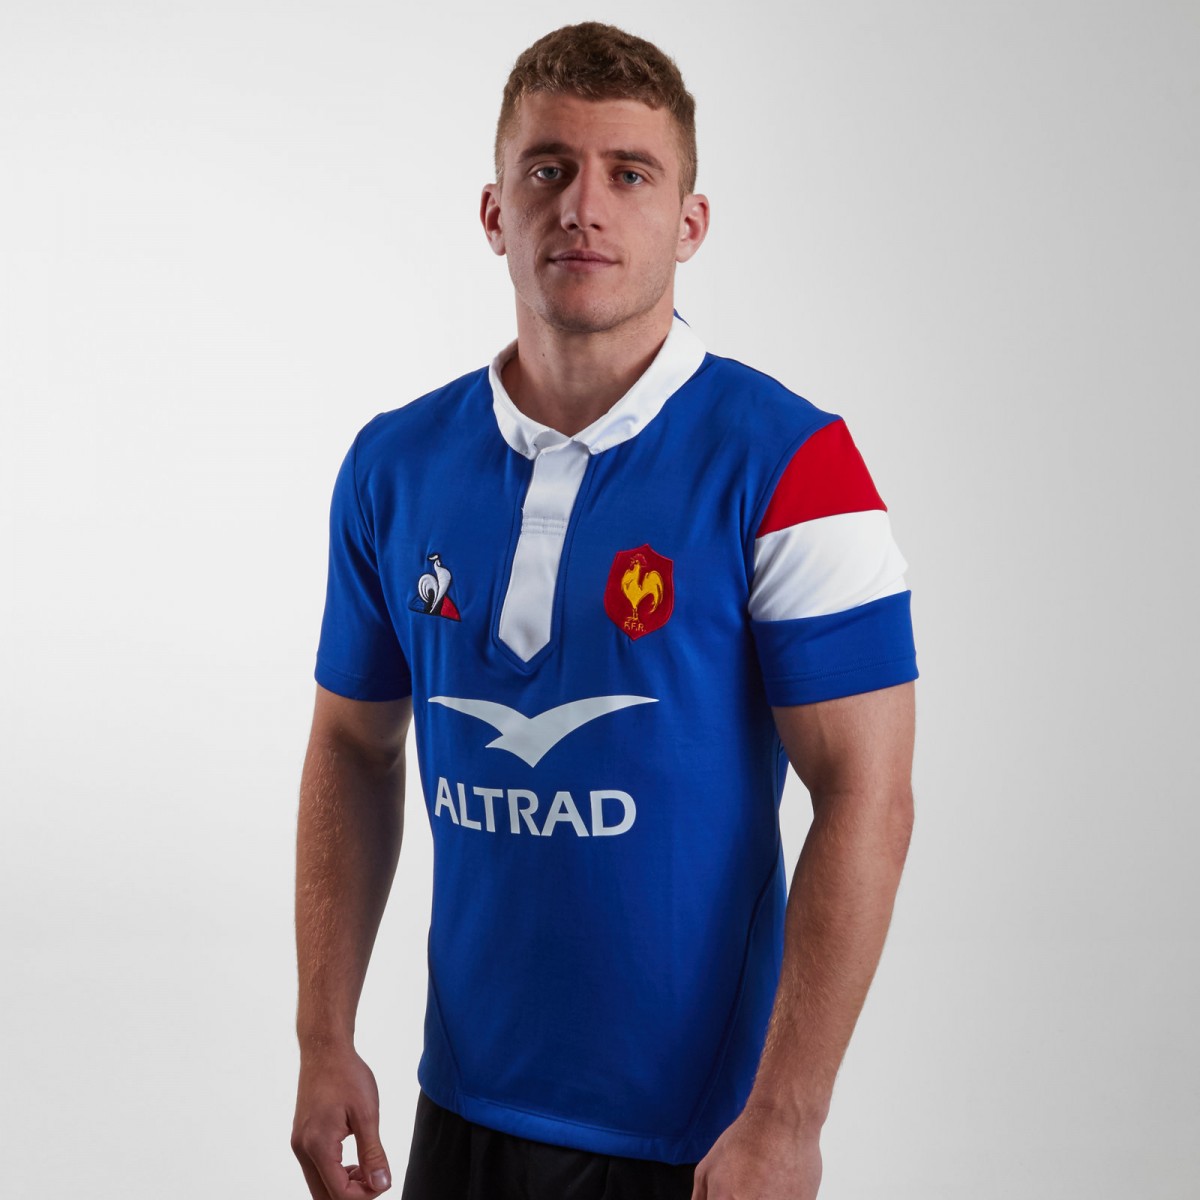 Details about   FRANCE 2018/2019 Retro XV home/away national team rugby jersey shirt S-3XL 